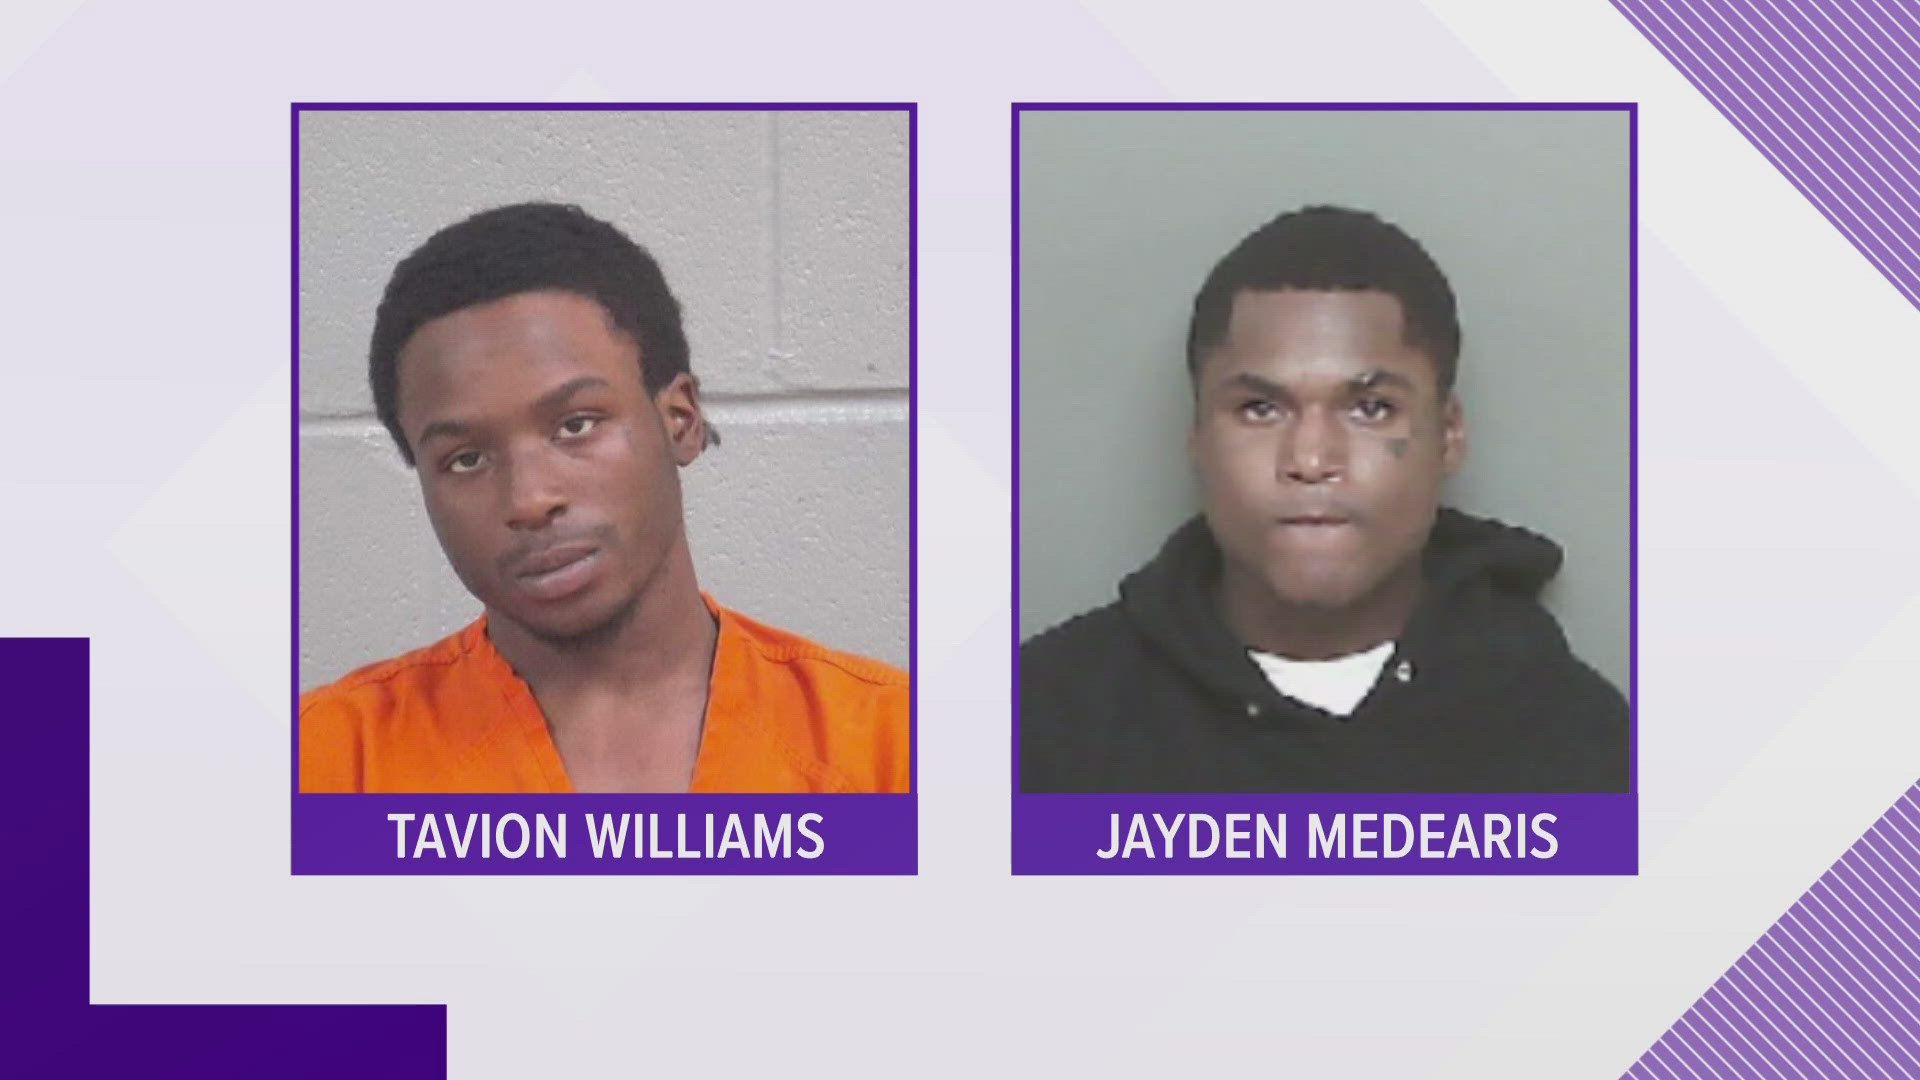 18-year-old Jayden Medearis was arrested on April 22 and 19-year-old Tavion Malique Williams was arrested on April 25.